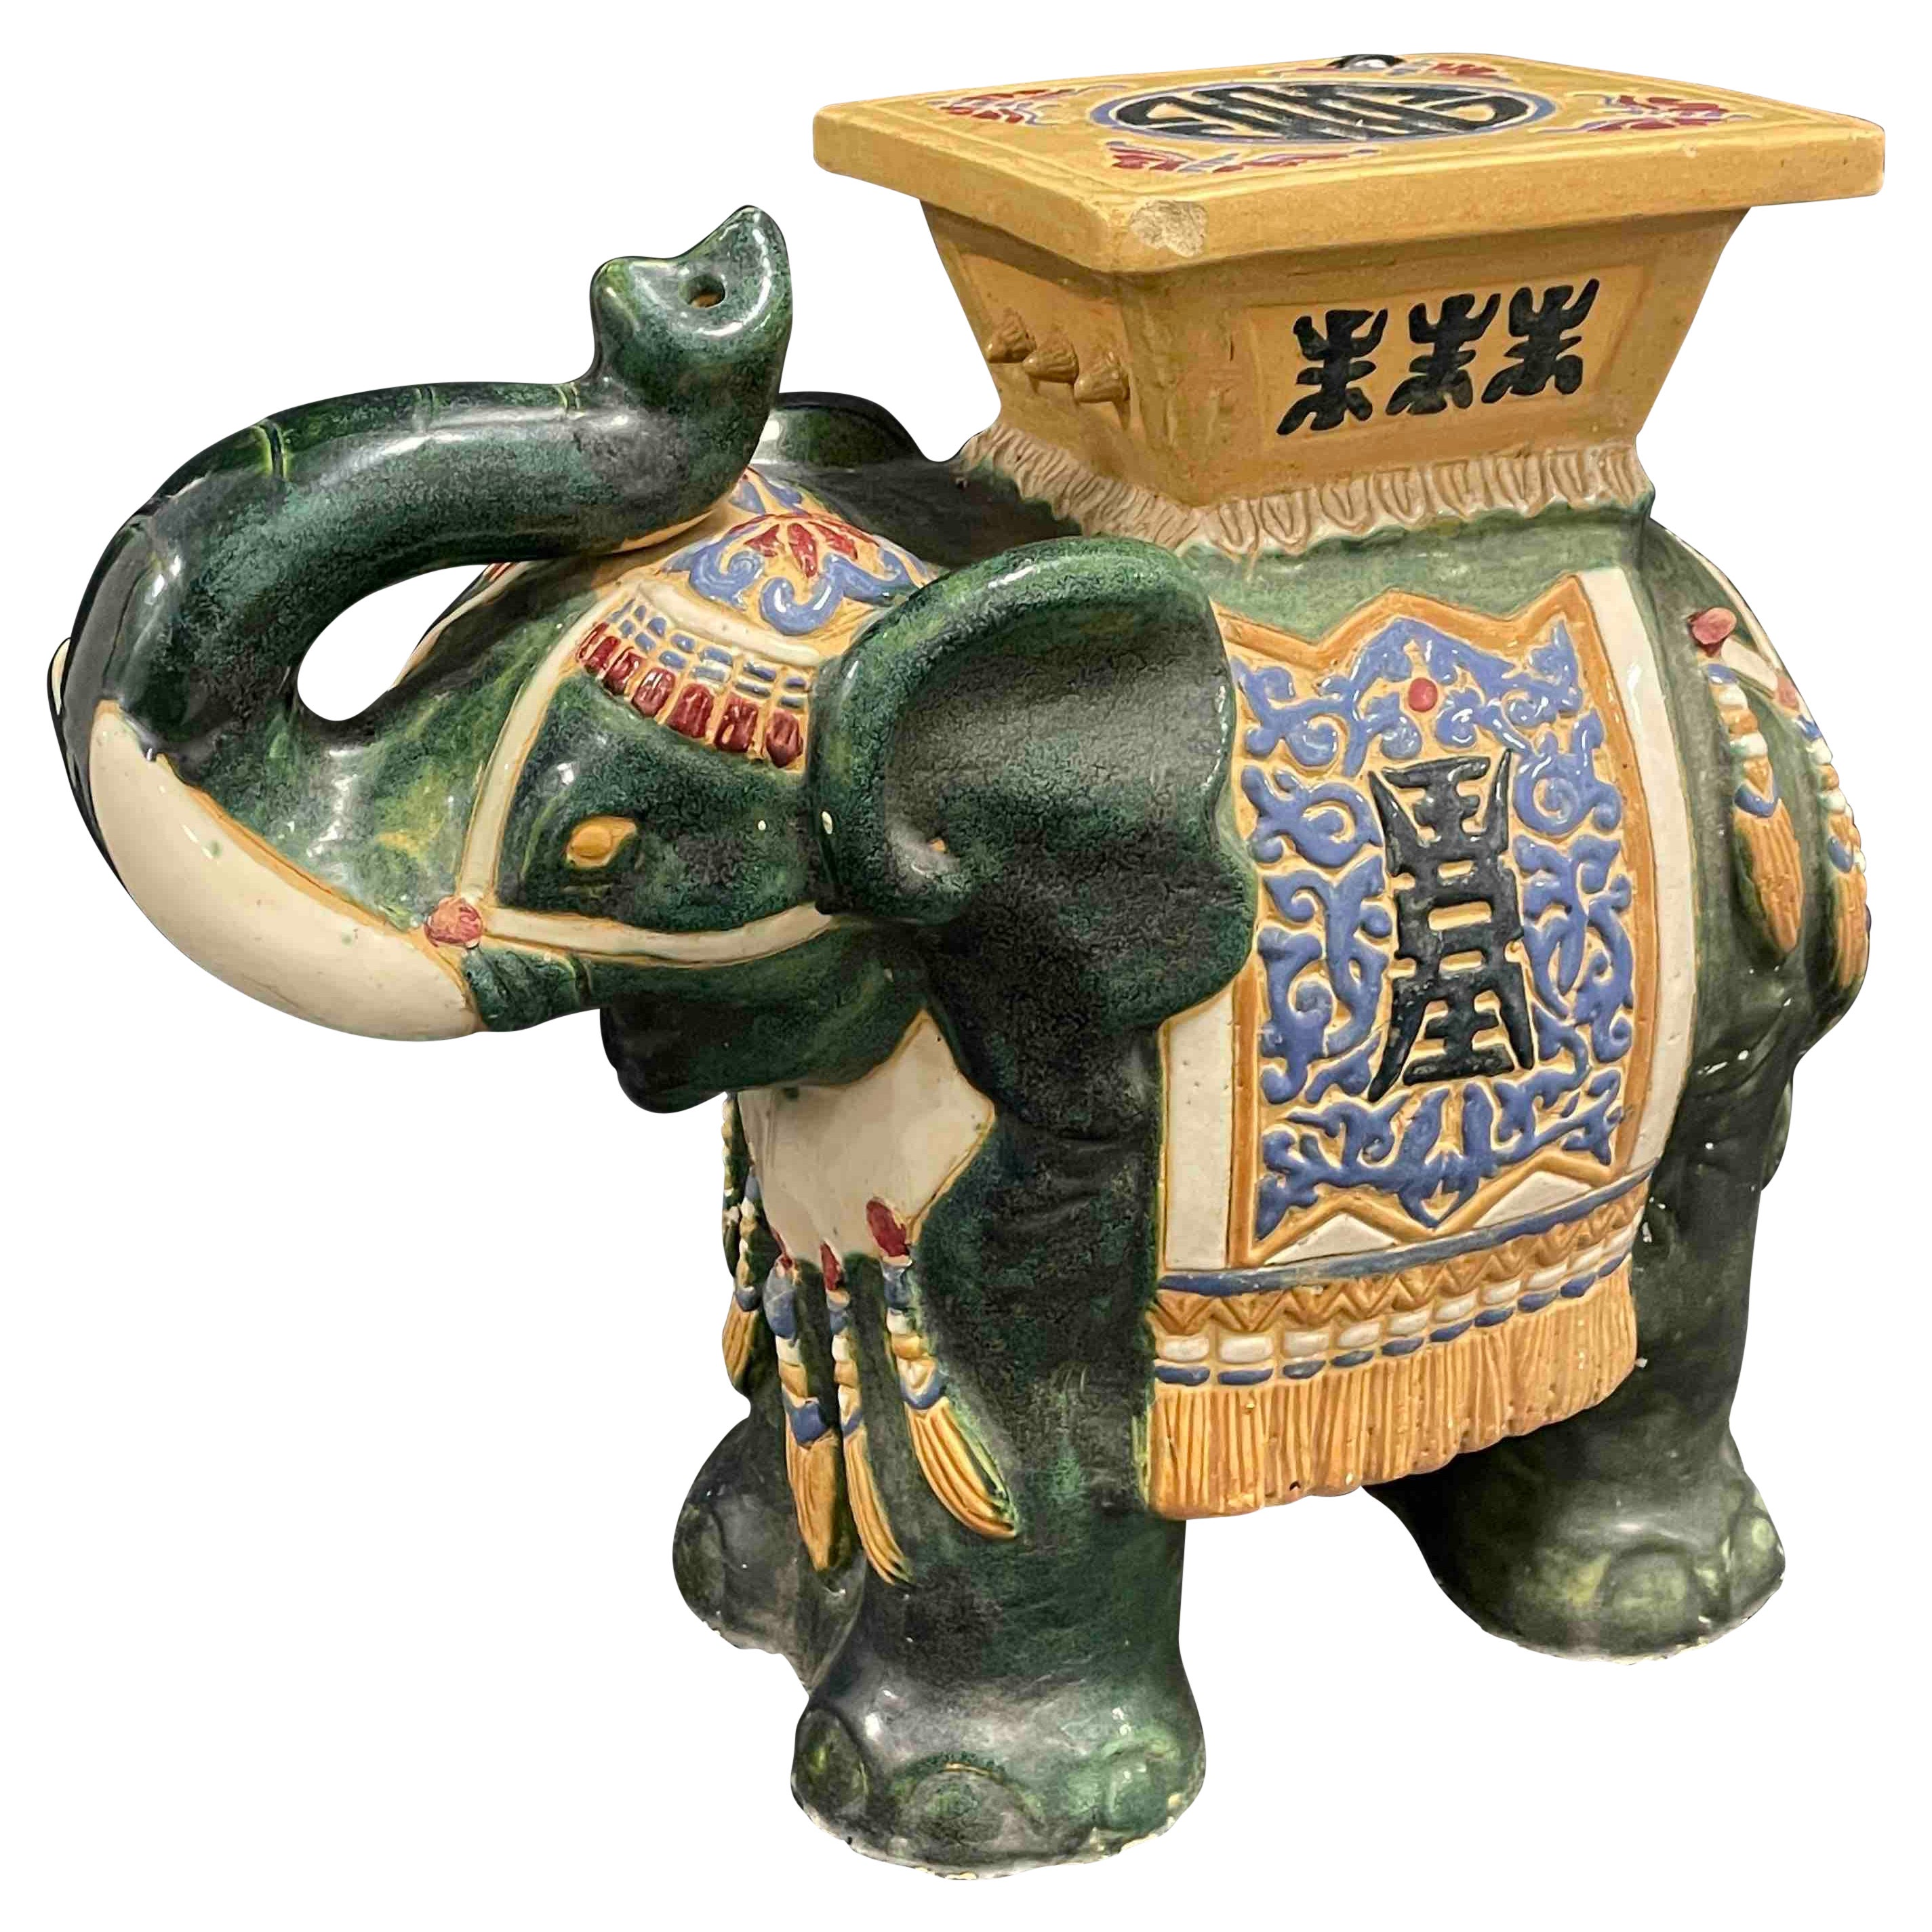 Hollywood Regency Chinese green Colored Elephant Garden Plant Stand or Seat